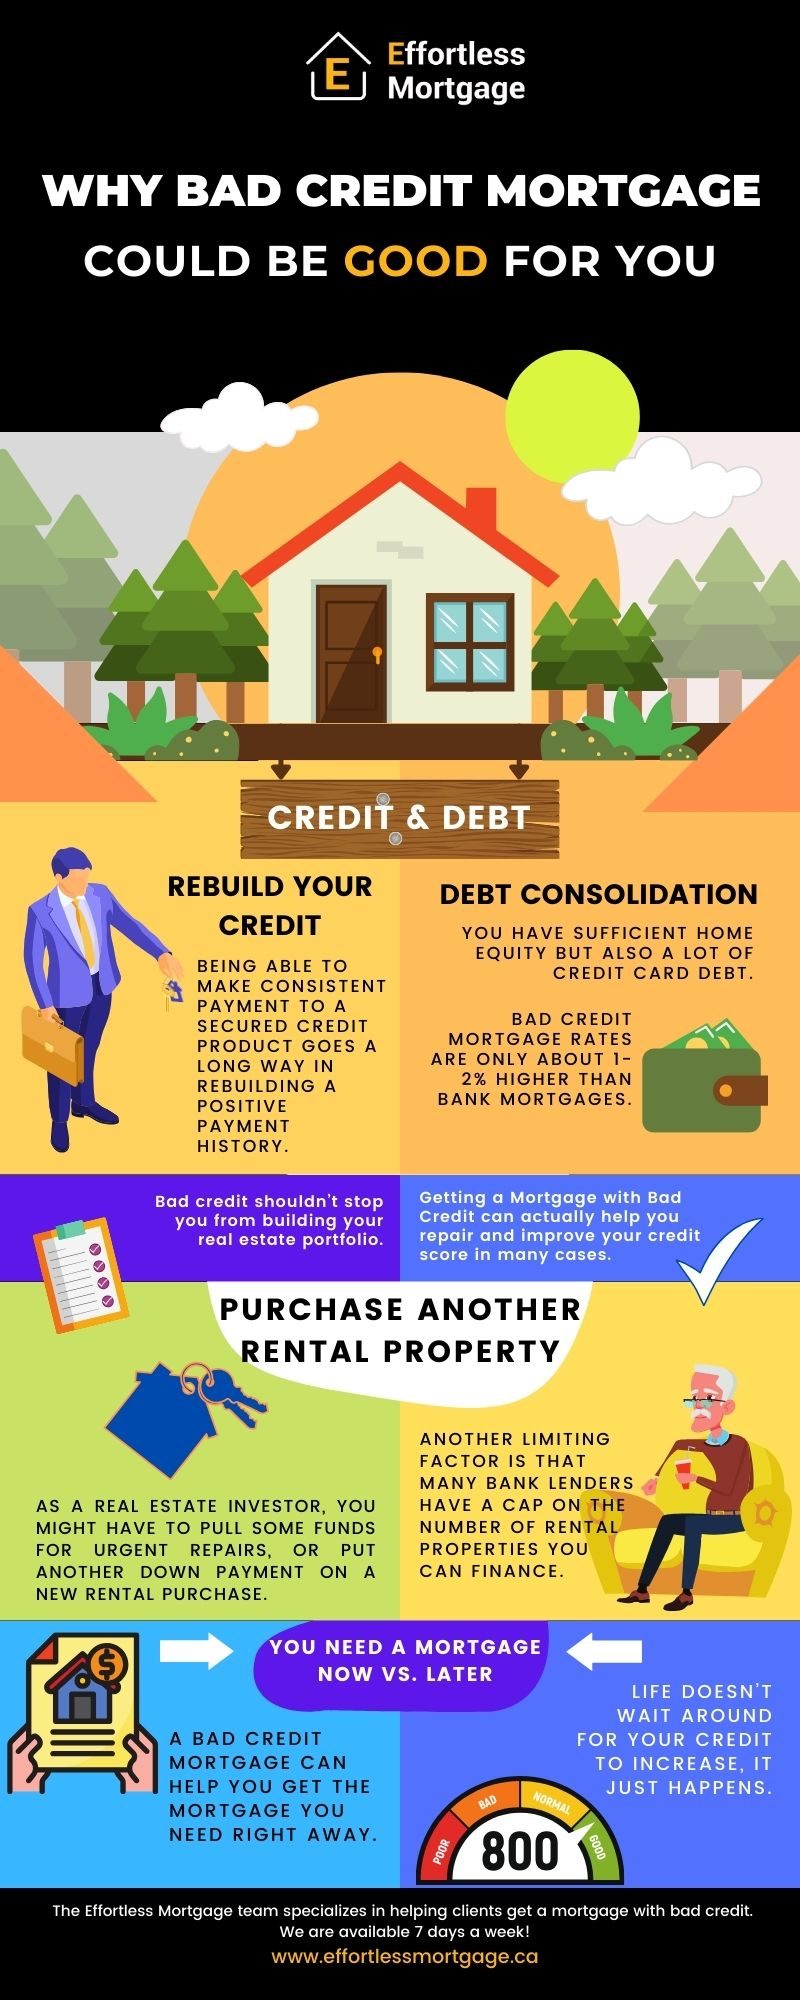 Tips for a bad credit mortgage